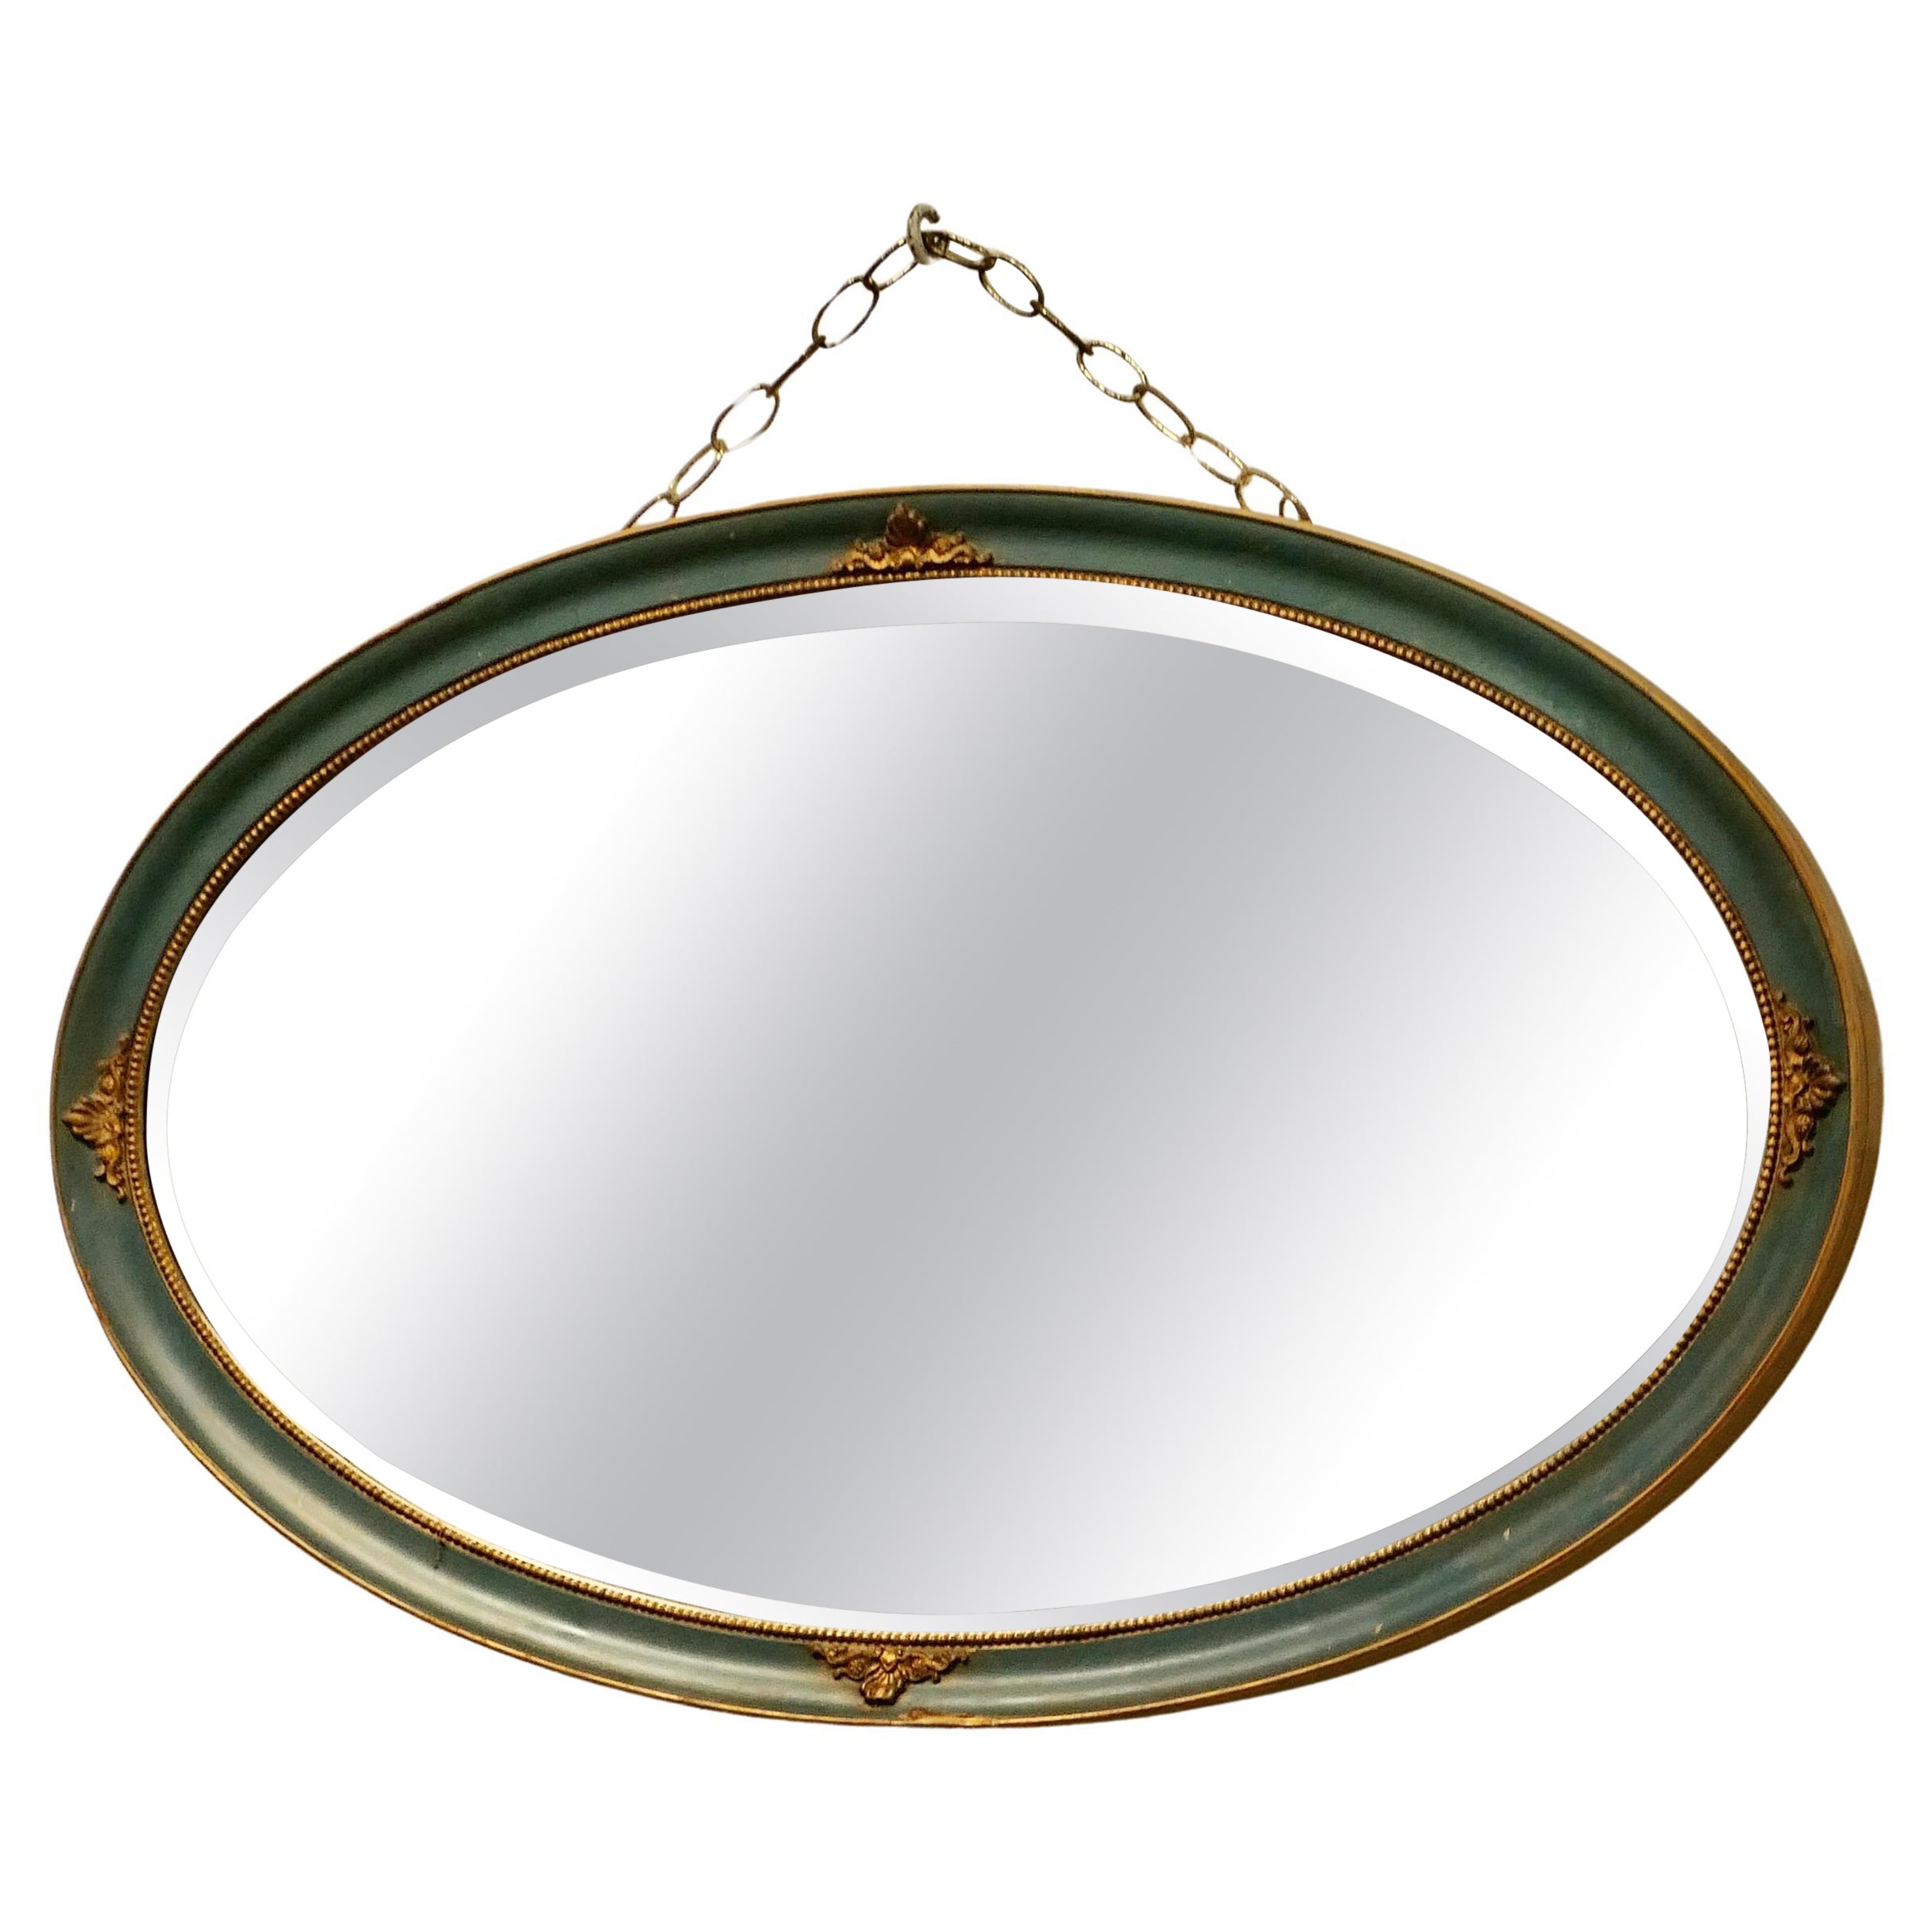 Oval Gilt and Painted Wall Mirror  This Mirror has a moulded oval frame   For Sale